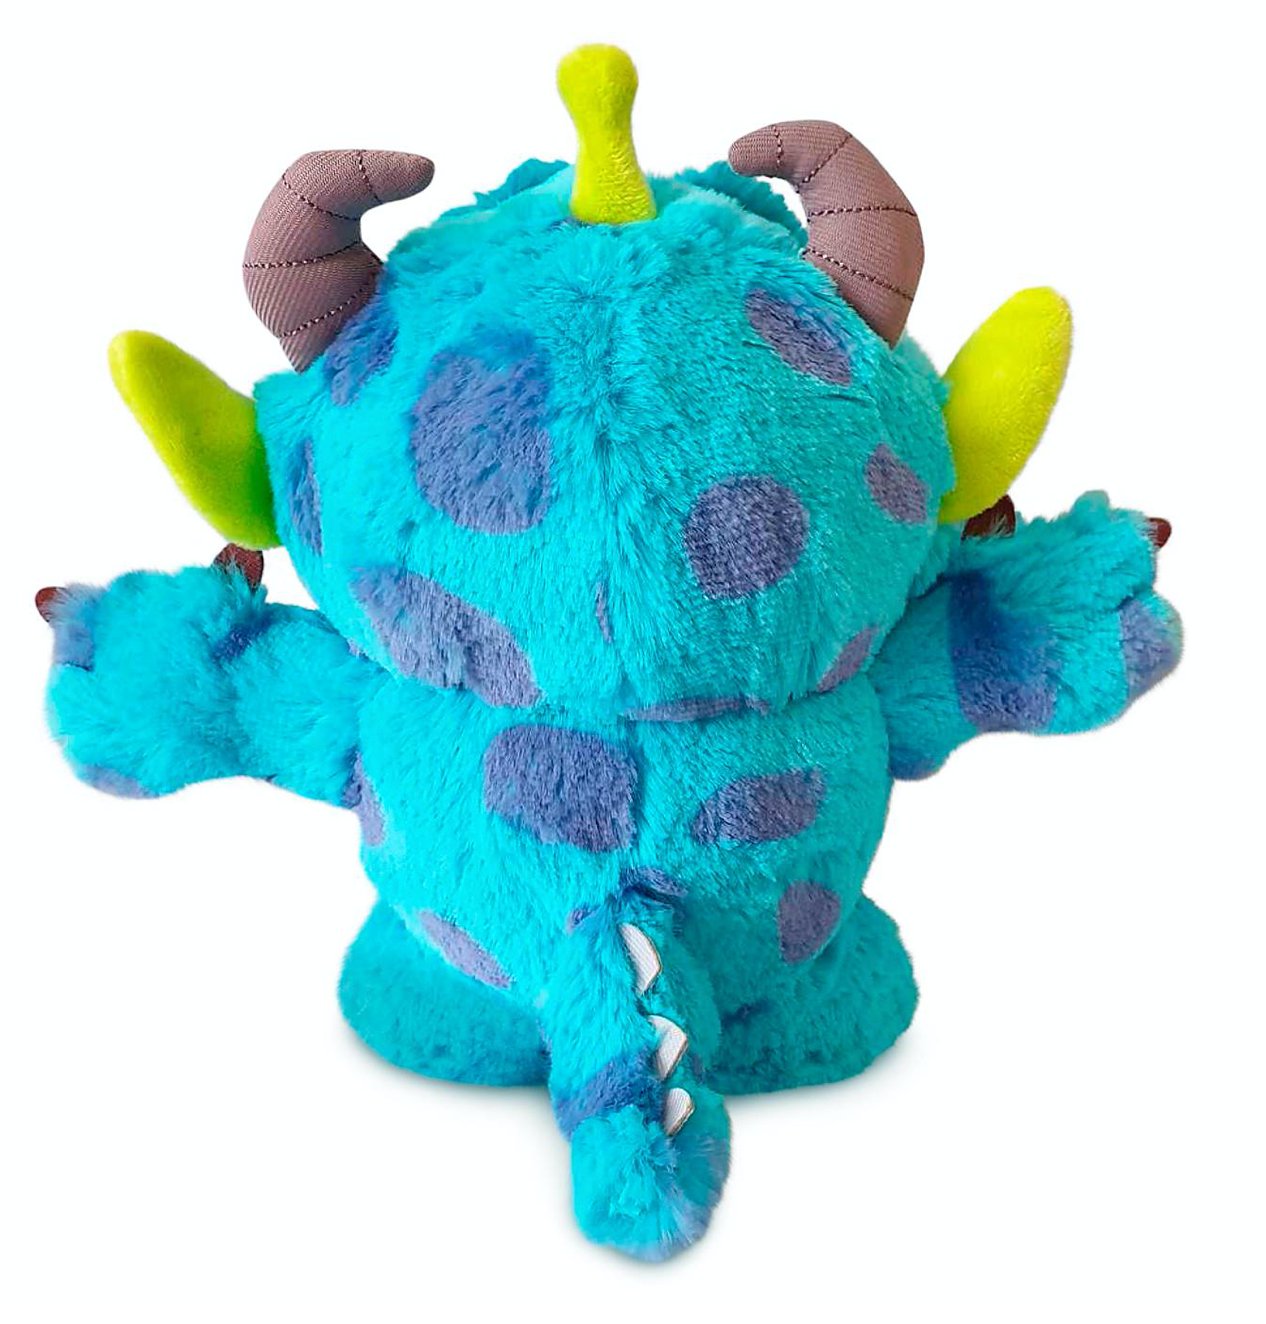 Disney Toy Story Alien Pixar Remix Plush Sulley Limited Release New with Tag